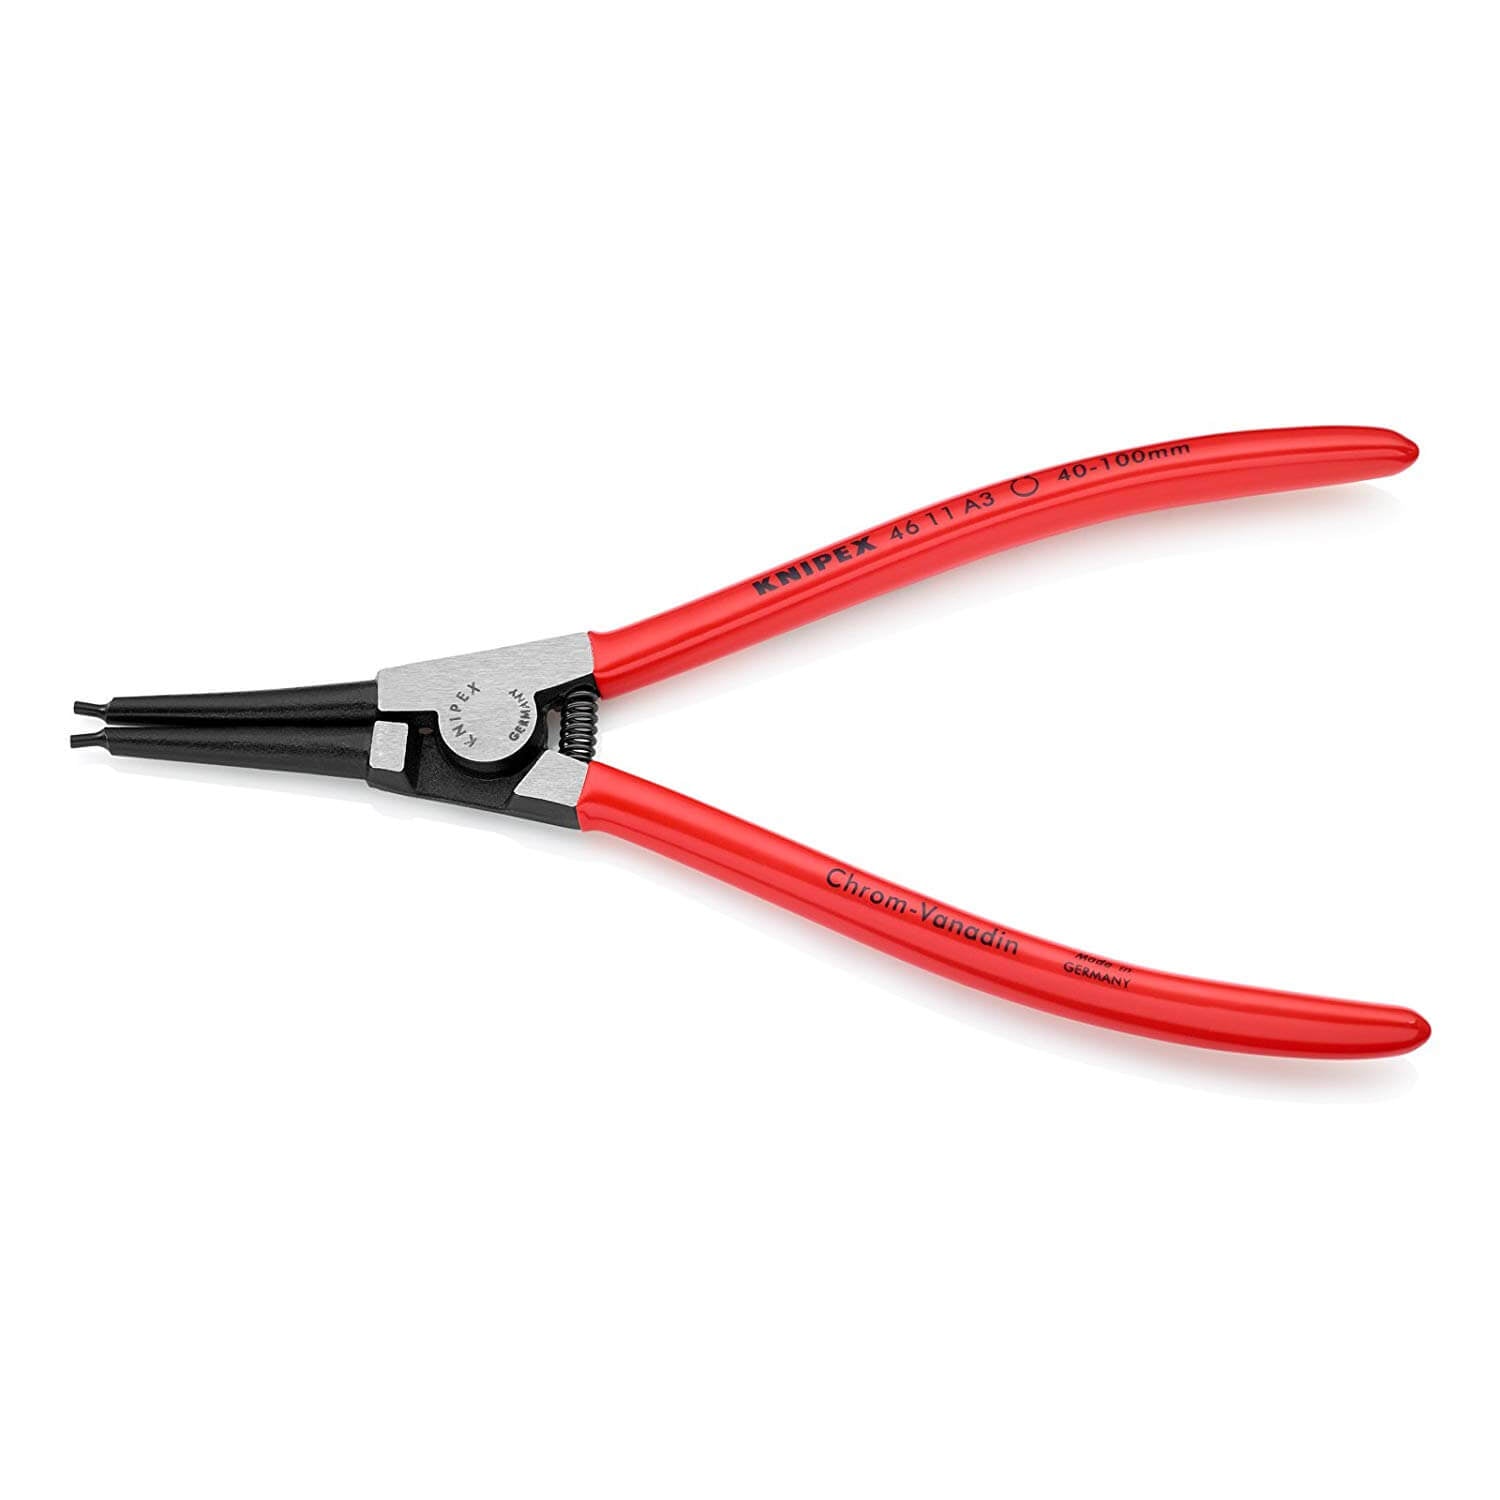 Knipex 4611A3 - Circlip "Snap Ring" Pliers 40-100mm - wise-line-tools